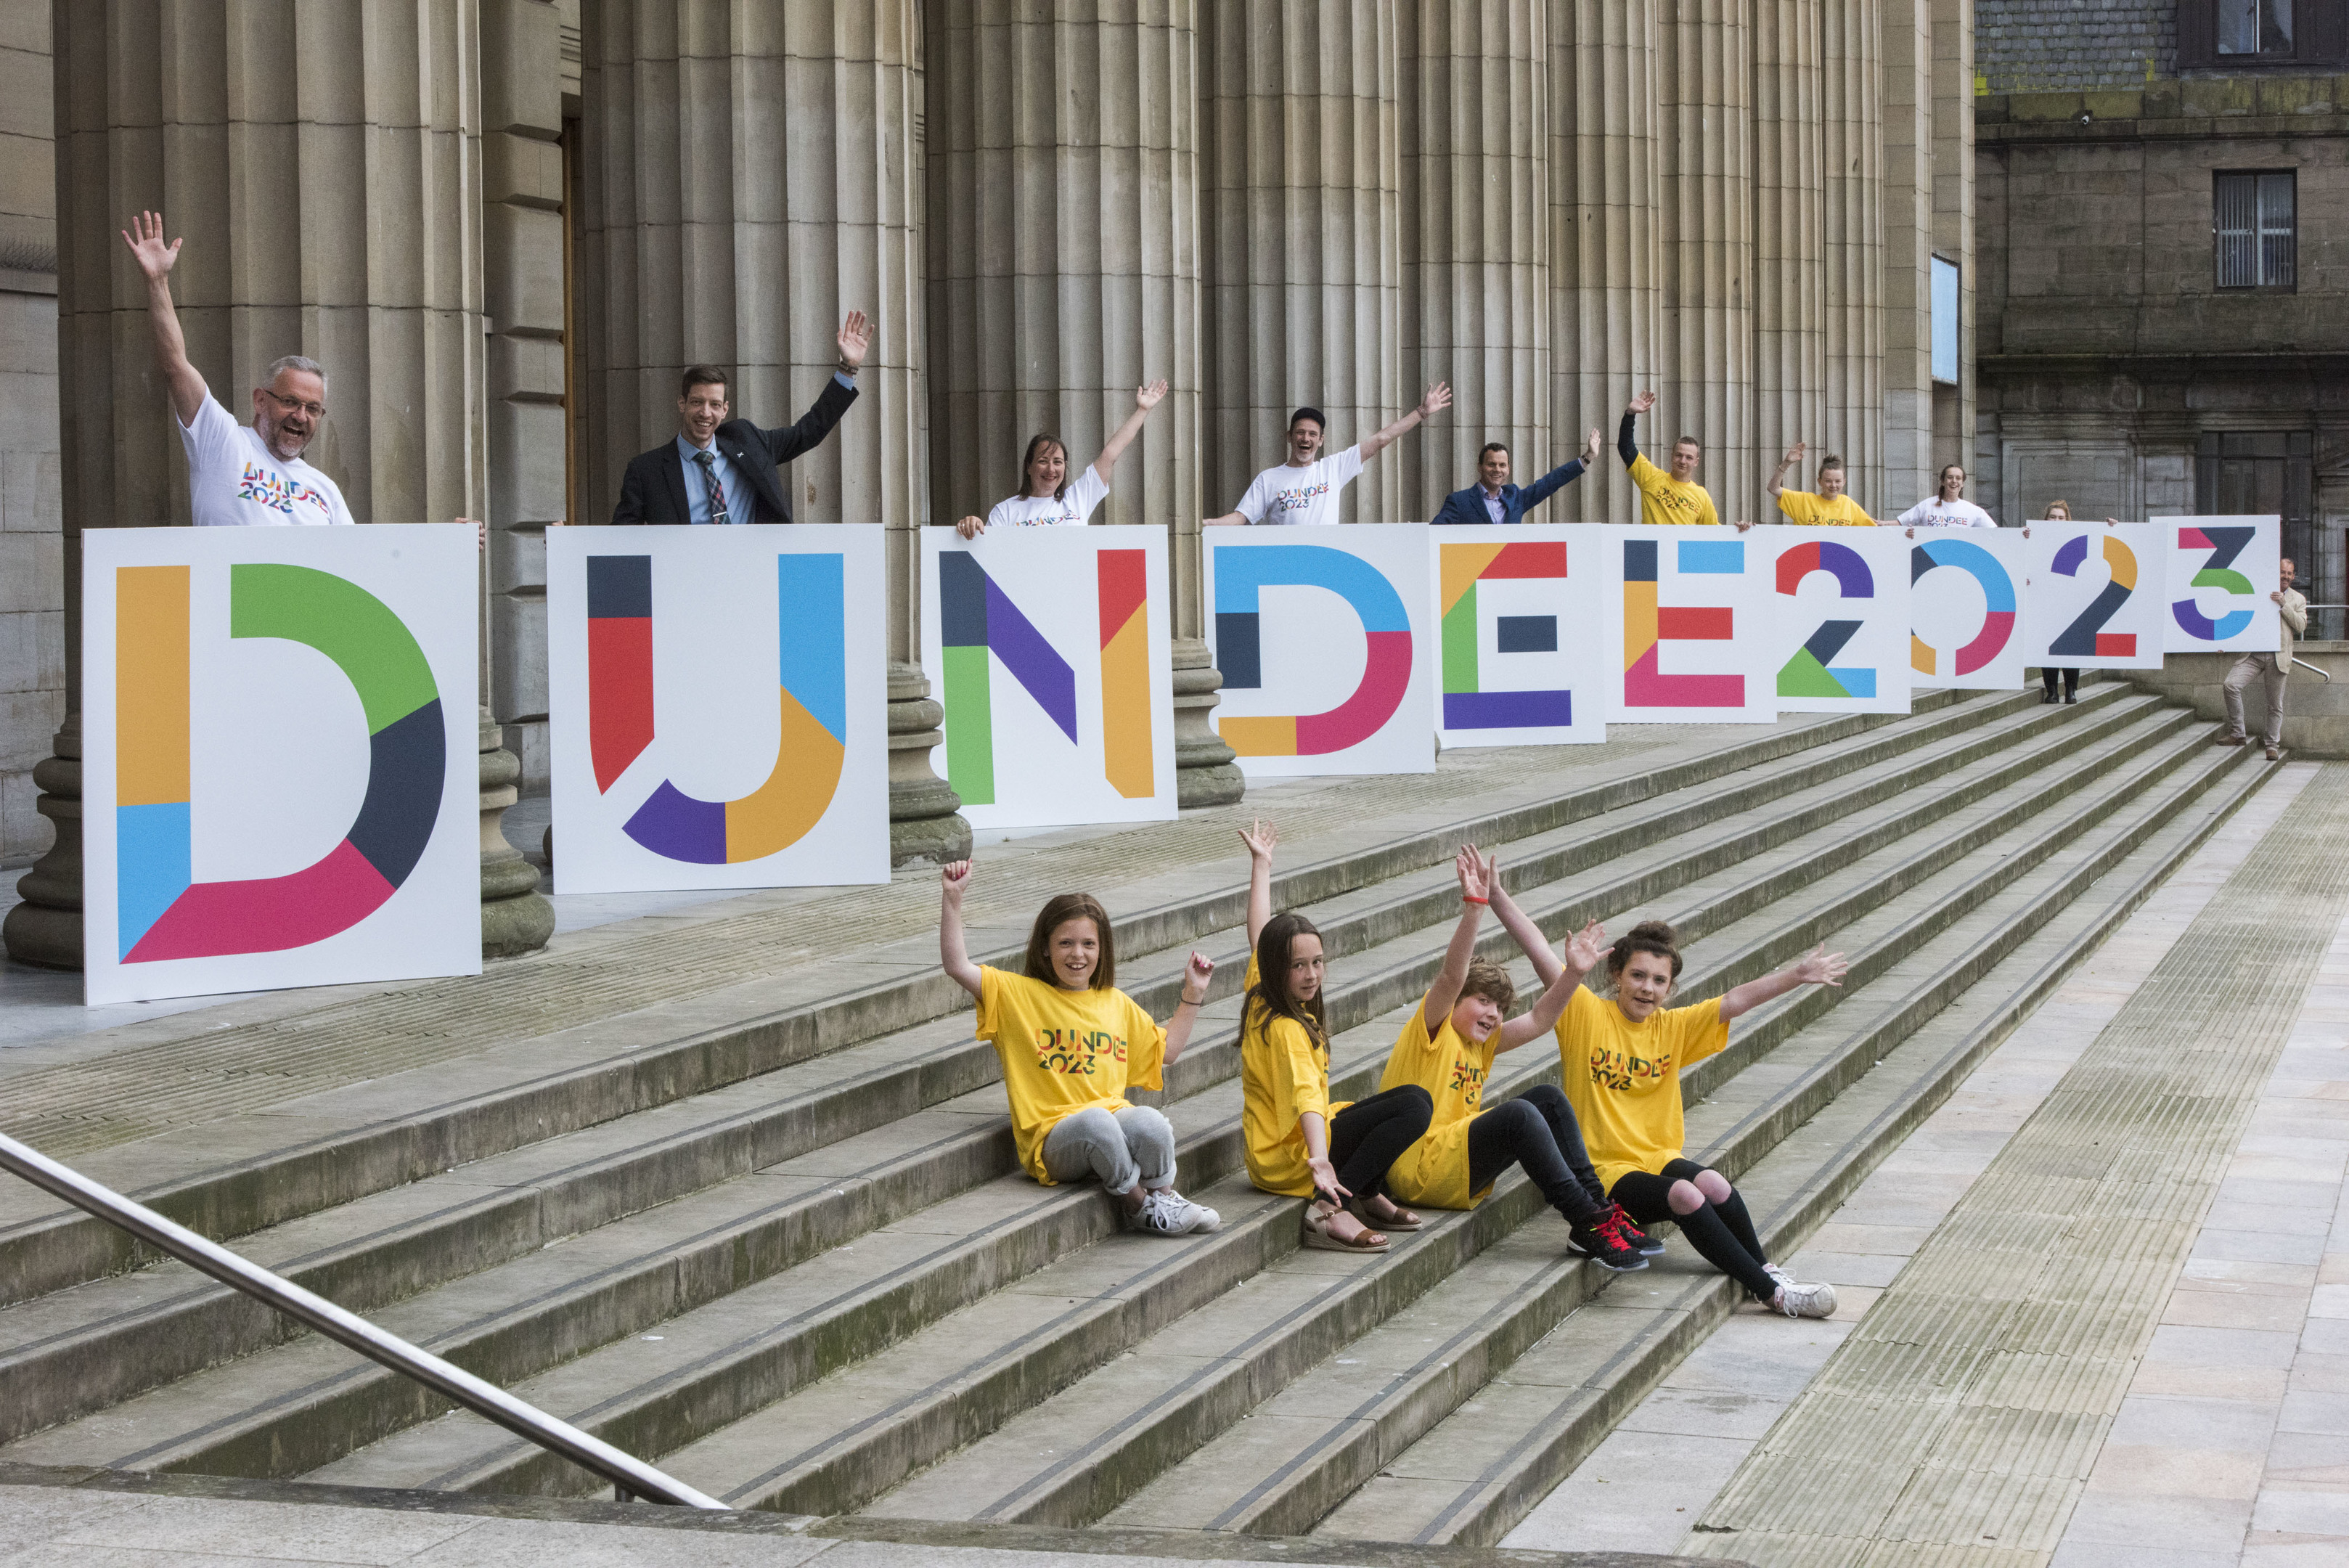 Dundee's bid for the title was derailed by Brexit.